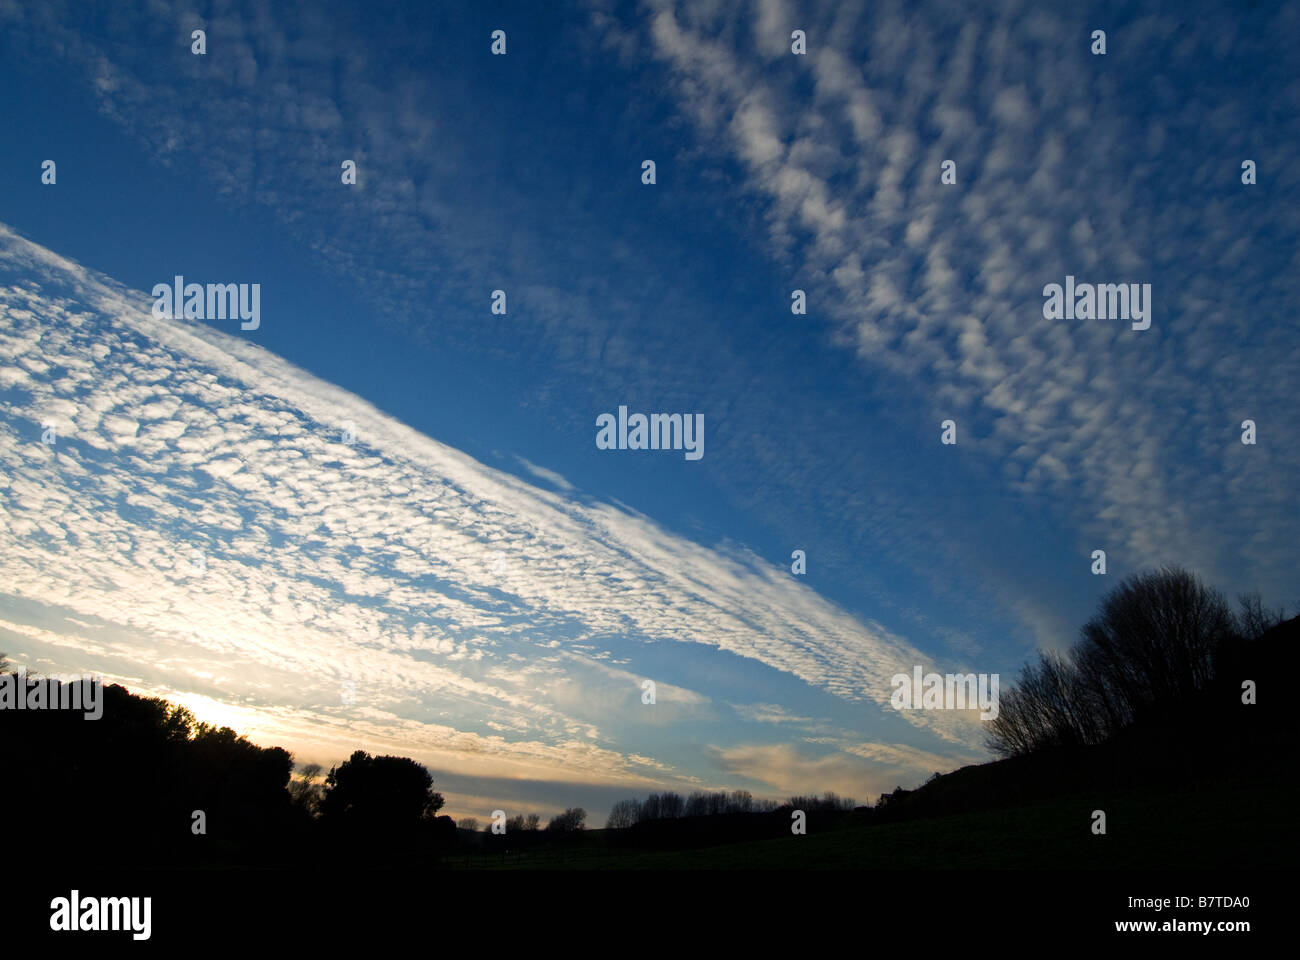 Cloud formation in the sky Stock Photo